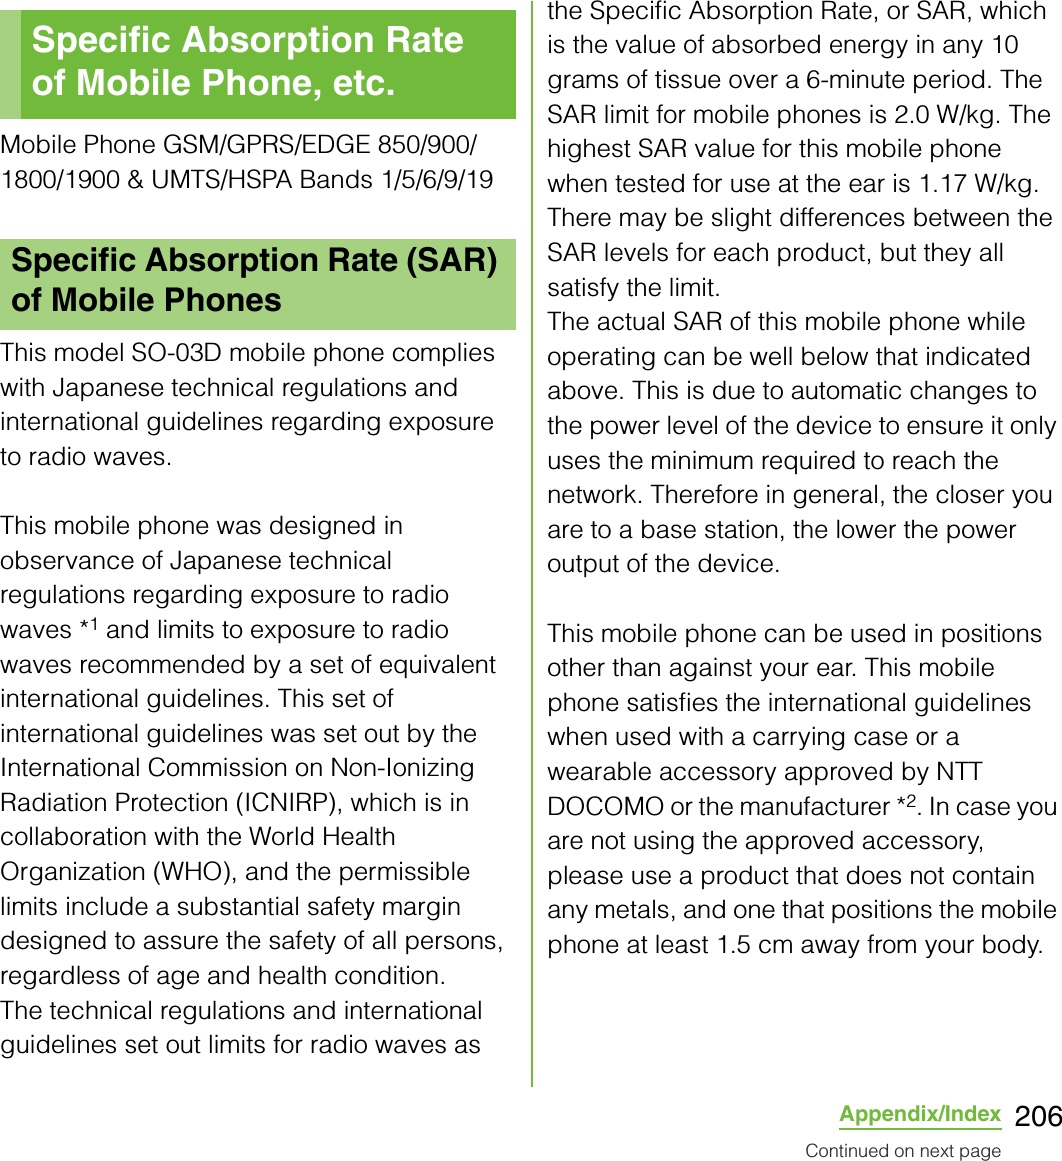 206Appendix/IndexMobile Phone GSM/GPRS/EDGE 850/900/1800/1900 &amp; UMTS/HSPA Bands 1/5/6/9/19This model SO-03D mobile phone complies with Japanese technical regulations and international guidelines regarding exposure to radio waves.This mobile phone was designed in observance of Japanese technical regulations regarding exposure to radio waves *1 and limits to exposure to radio waves recommended by a set of equivalent international guidelines. This set of international guidelines was set out by the International Commission on Non-Ionizing Radiation Protection (ICNIRP), which is in collaboration with the World Health Organization (WHO), and the permissible limits include a substantial safety margin designed to assure the safety of all persons, regardless of age and health condition.The technical regulations and international guidelines set out limits for radio waves as the Specific Absorption Rate, or SAR, which is the value of absorbed energy in any 10 grams of tissue over a 6-minute period. The SAR limit for mobile phones is 2.0 W/kg. The highest SAR value for this mobile phone when tested for use at the ear is 1.17 W/kg. There may be slight differences between the SAR levels for each product, but they all satisfy the limit.The actual SAR of this mobile phone while operating can be well below that indicated above. This is due to automatic changes to the power level of the device to ensure it only uses the minimum required to reach the network. Therefore in general, the closer you are to a base station, the lower the power output of the device.This mobile phone can be used in positions other than against your ear. This mobile phone satisfies the international guidelines when used with a carrying case or a wearable accessory approved by NTT DOCOMO or the manufacturer *2. In case you are not using the approved accessory, please use a product that does not contain any metals, and one that positions the mobile phone at least 1.5 cm away from your body.Specific Absorption Rate of Mobile Phone, etc.Specific Absorption Rate (SAR) of Mobile PhonesContinued on next page